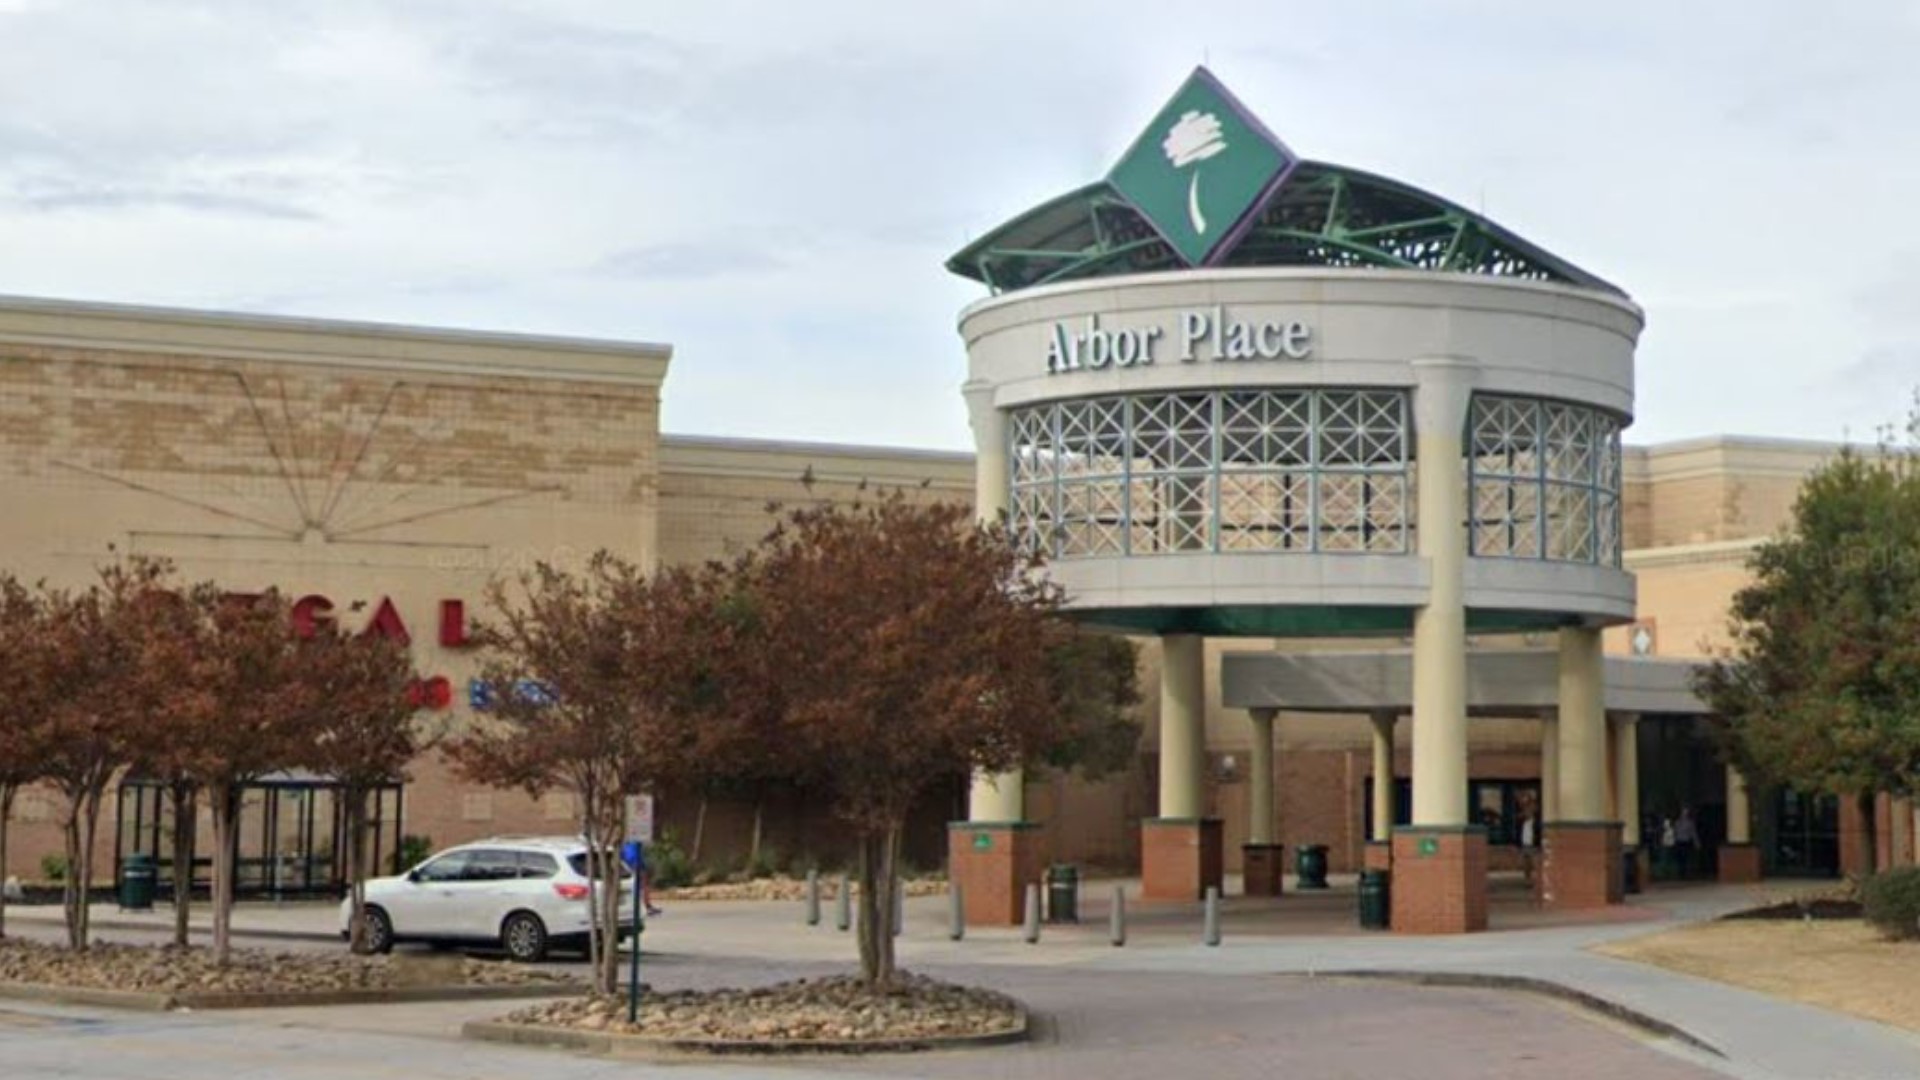 Two teens were arrested after a fight began inside Arbor Place Mall in Douglasville Sunday evening, according to the police department.